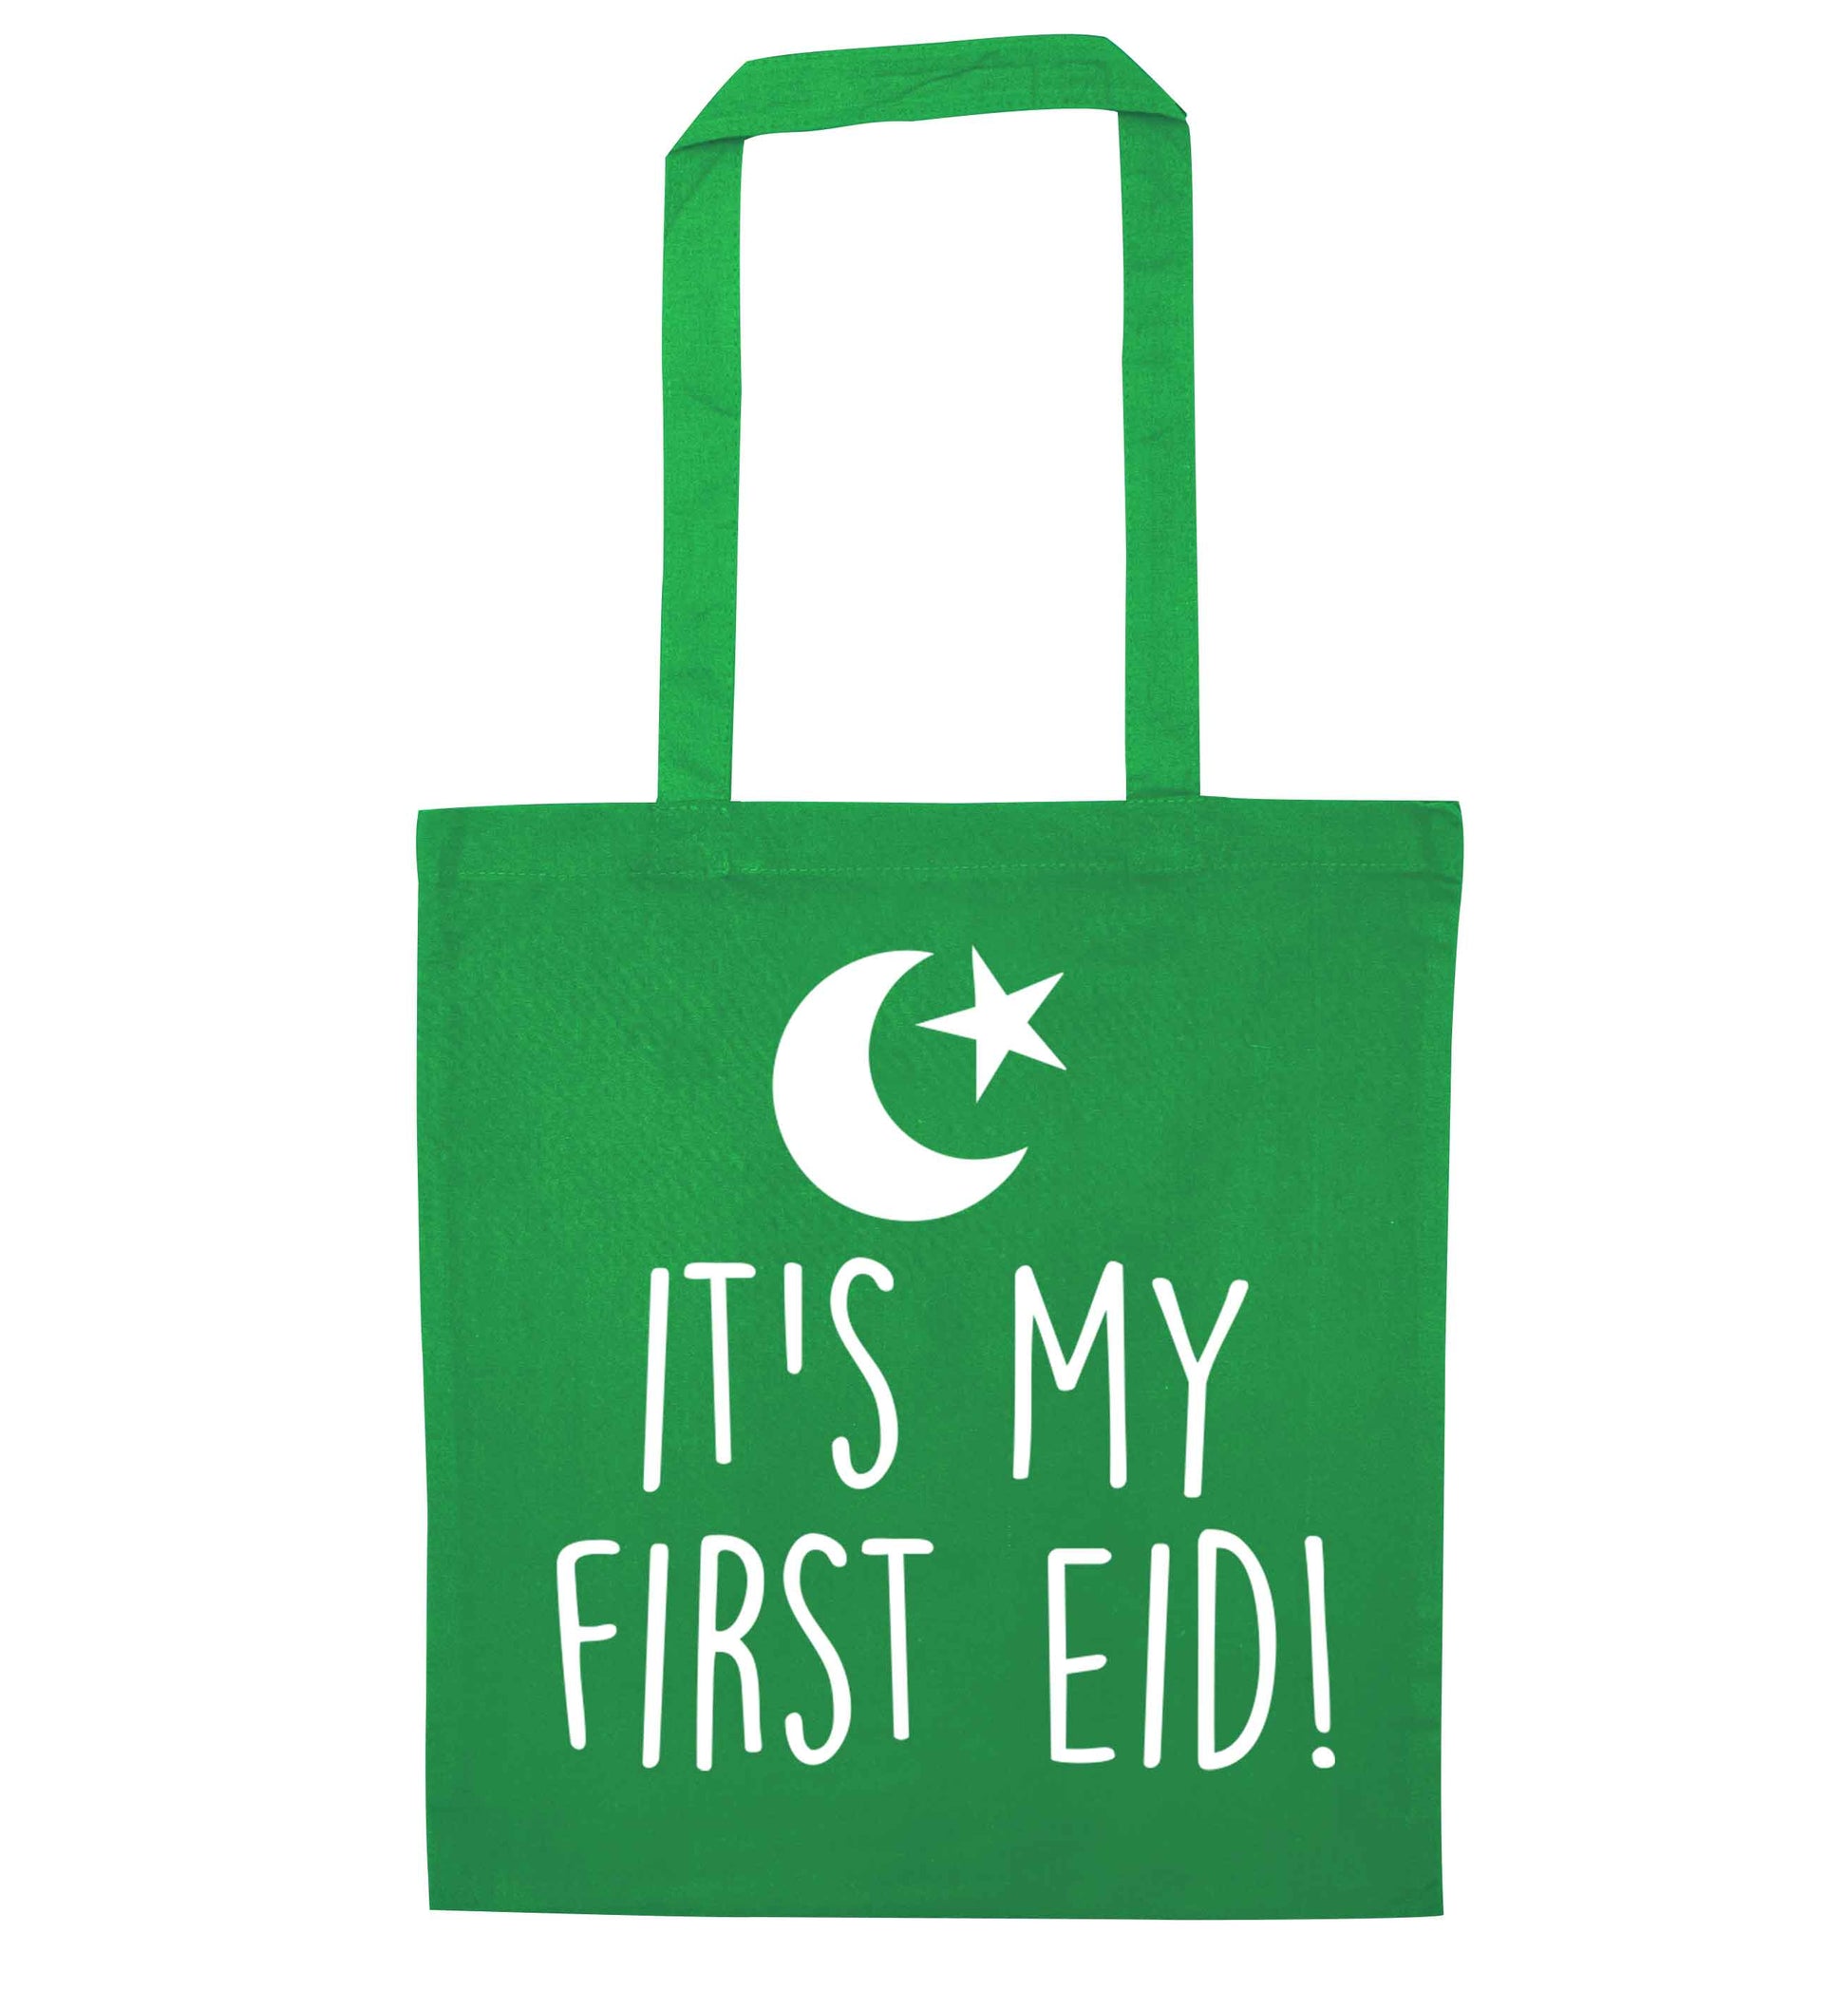 It's my first Eid green tote bag